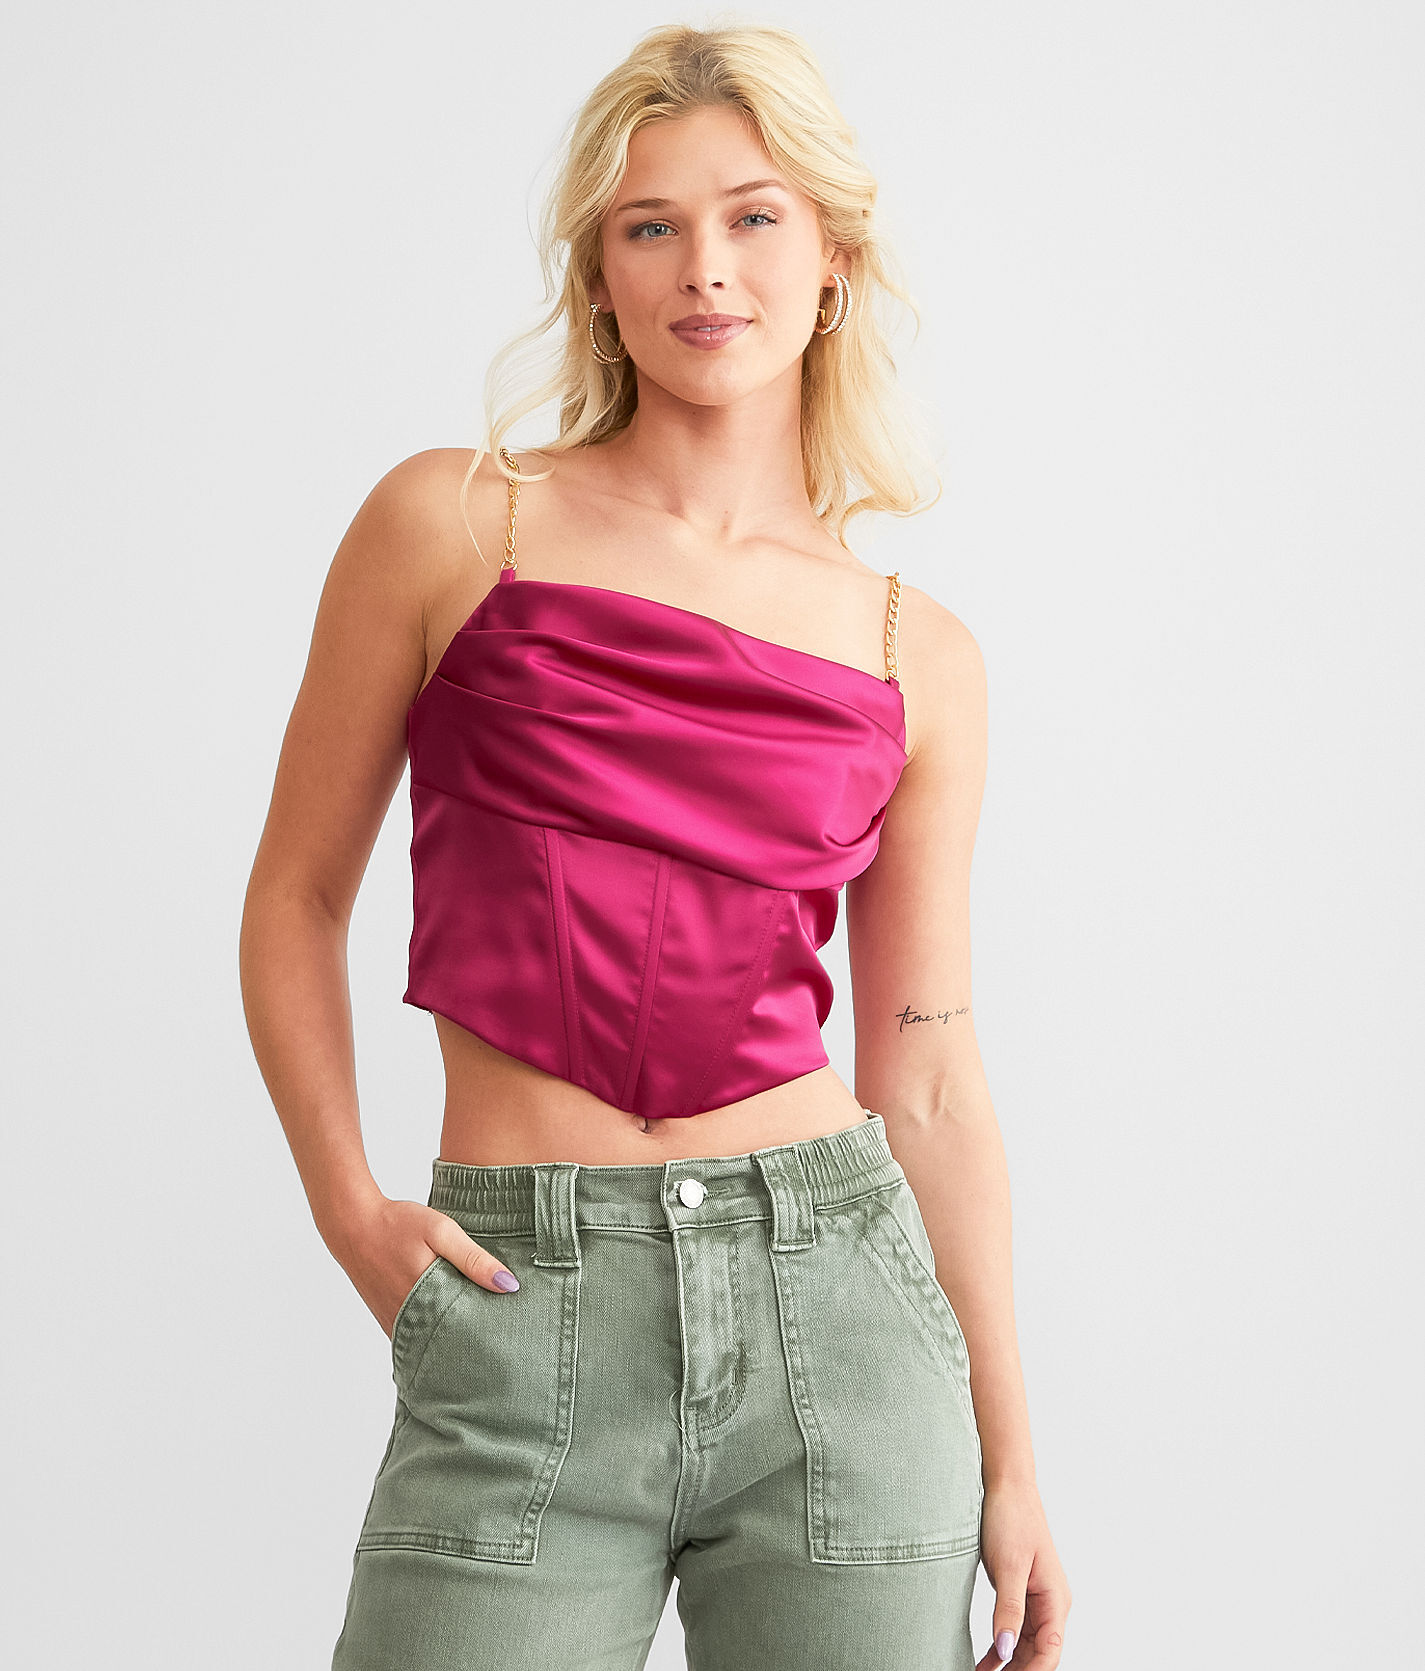 The Vintage Shop Satin Corset Cropped Tank Top  - Pink - female - Size: Extra Small